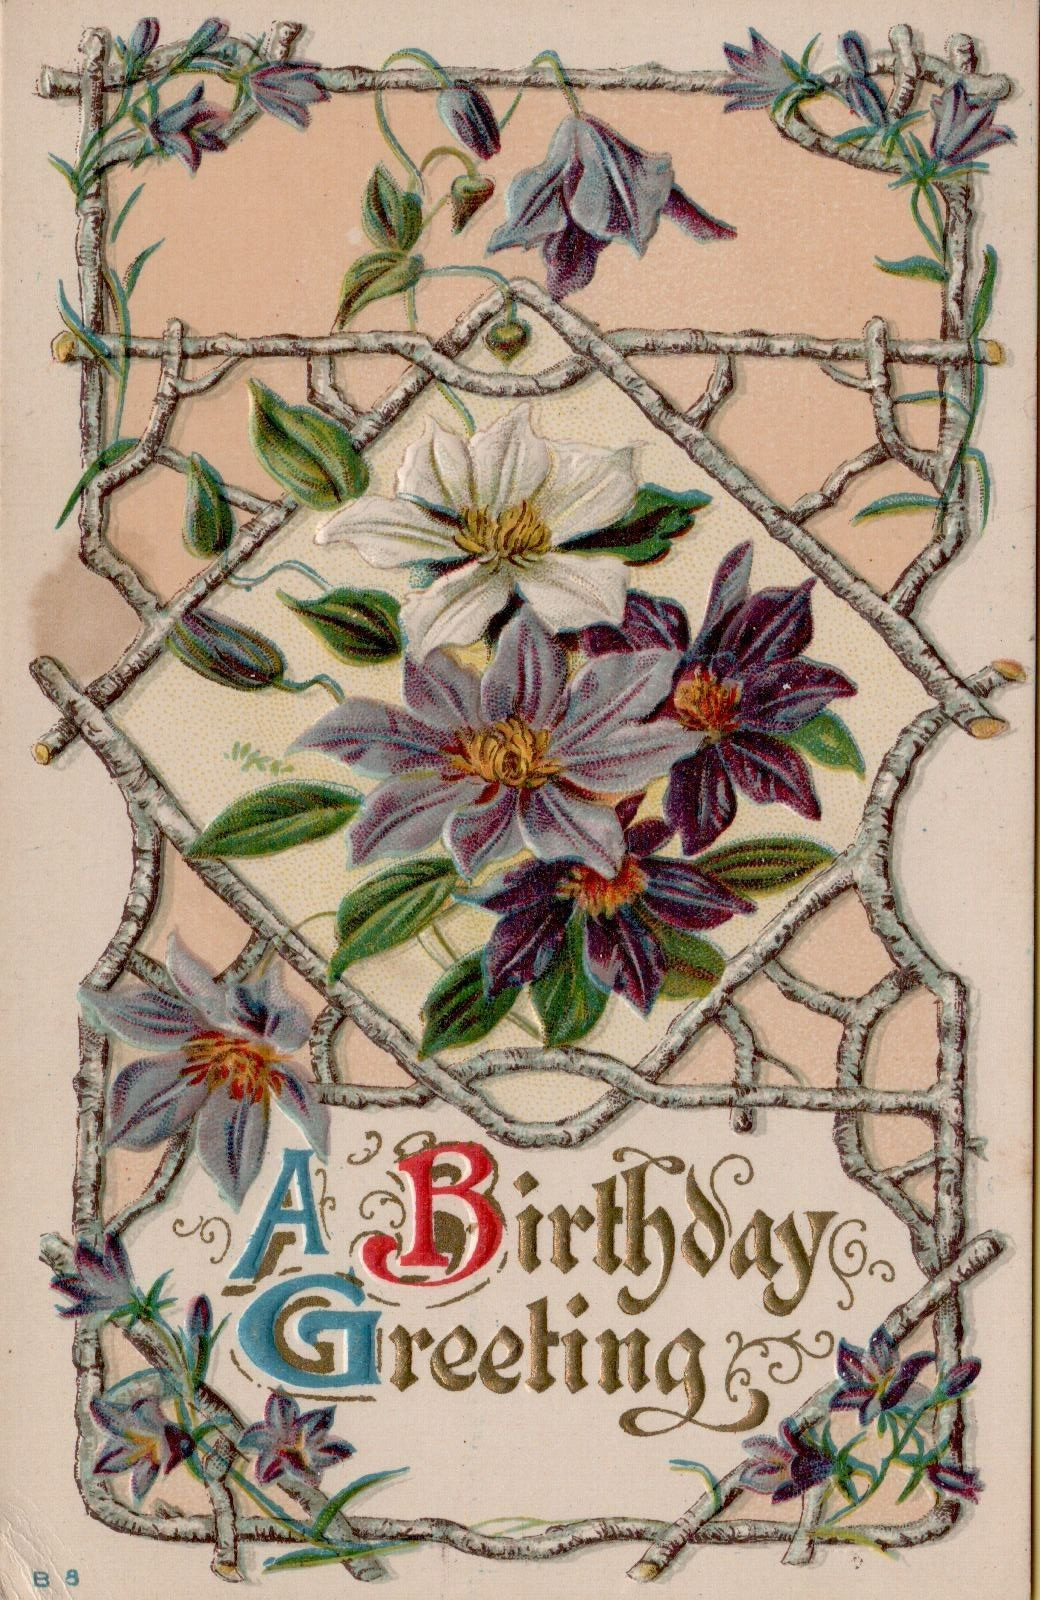 Birthday Greetings Postcard Purple Flowers Framed by Birch Twigs 1911 Posted